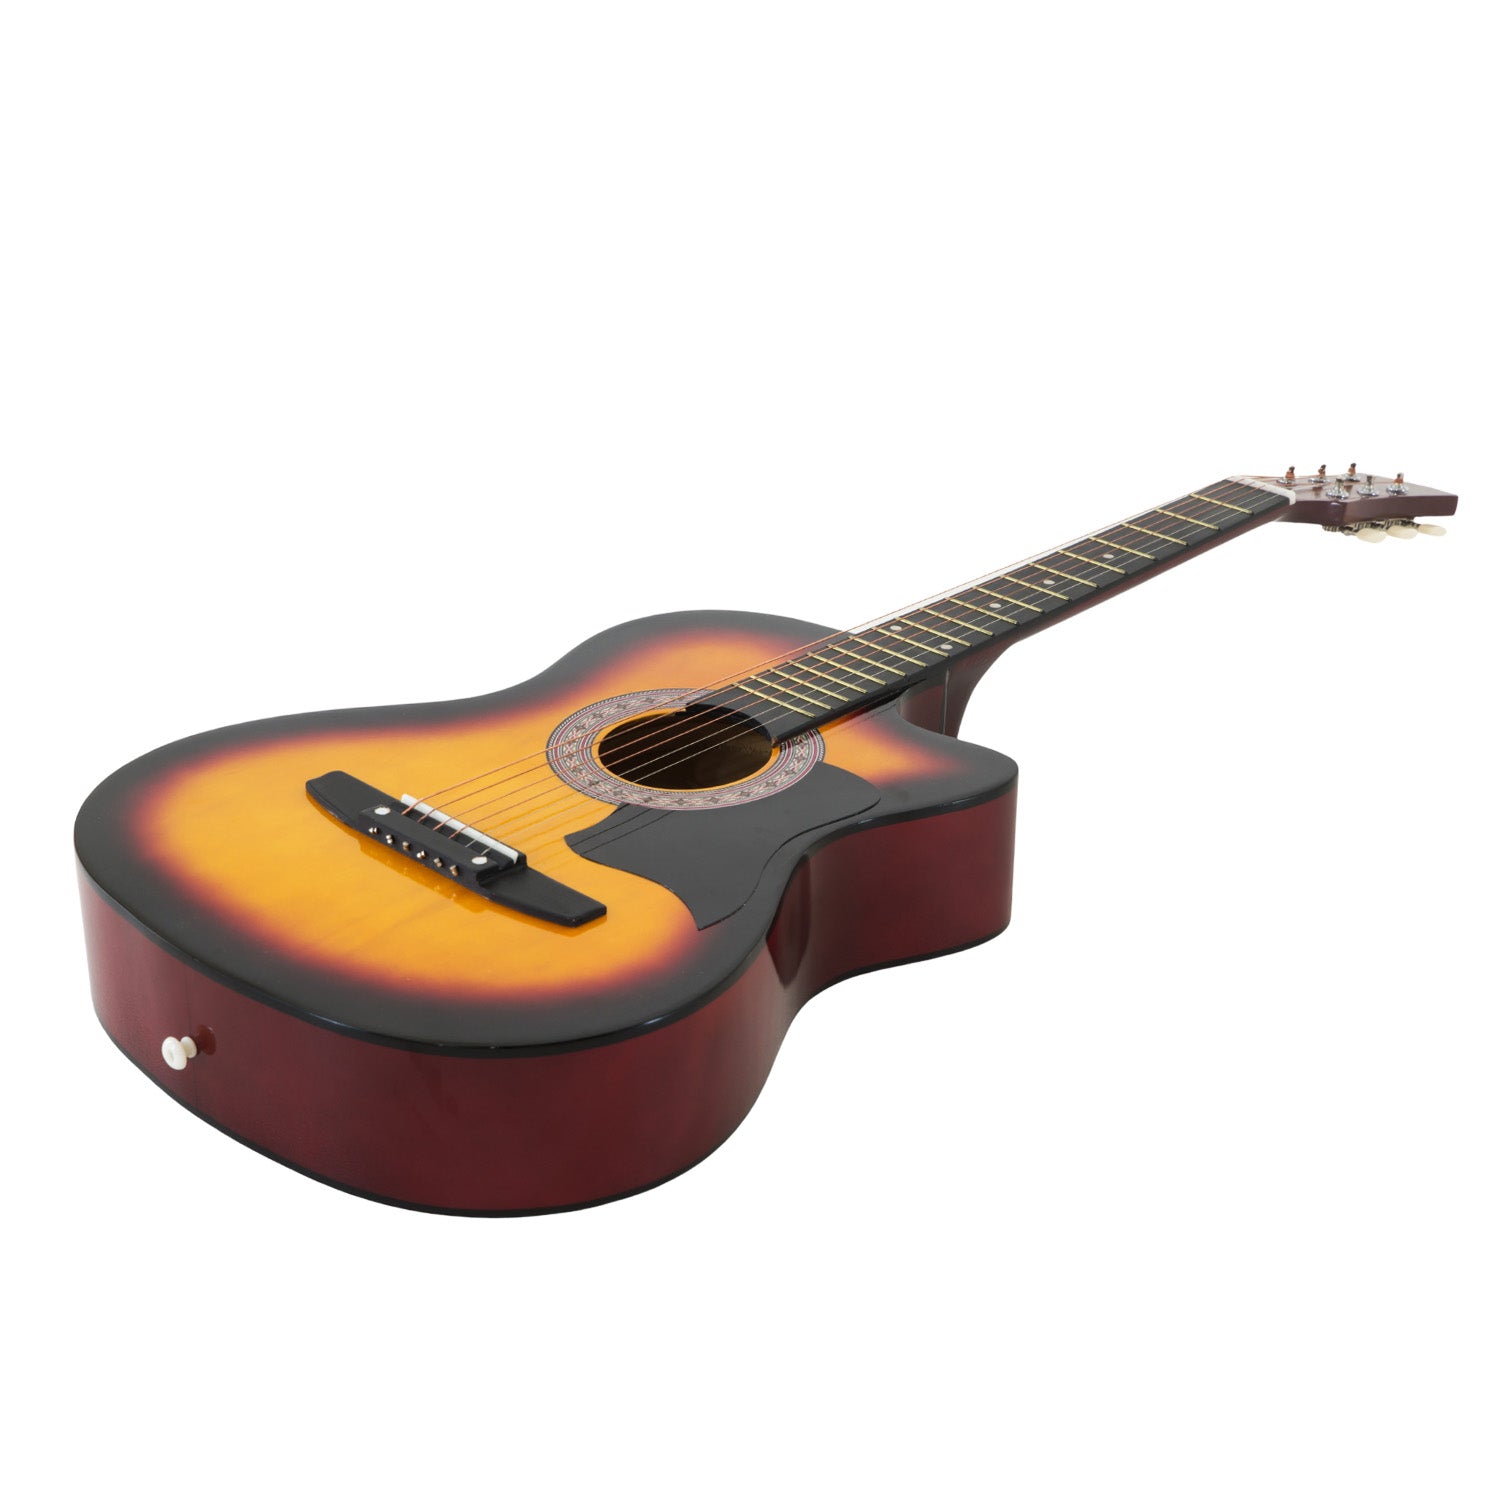 38in Pro Cutaway Acoustic Guitar with Bag Strings - Sun Burst